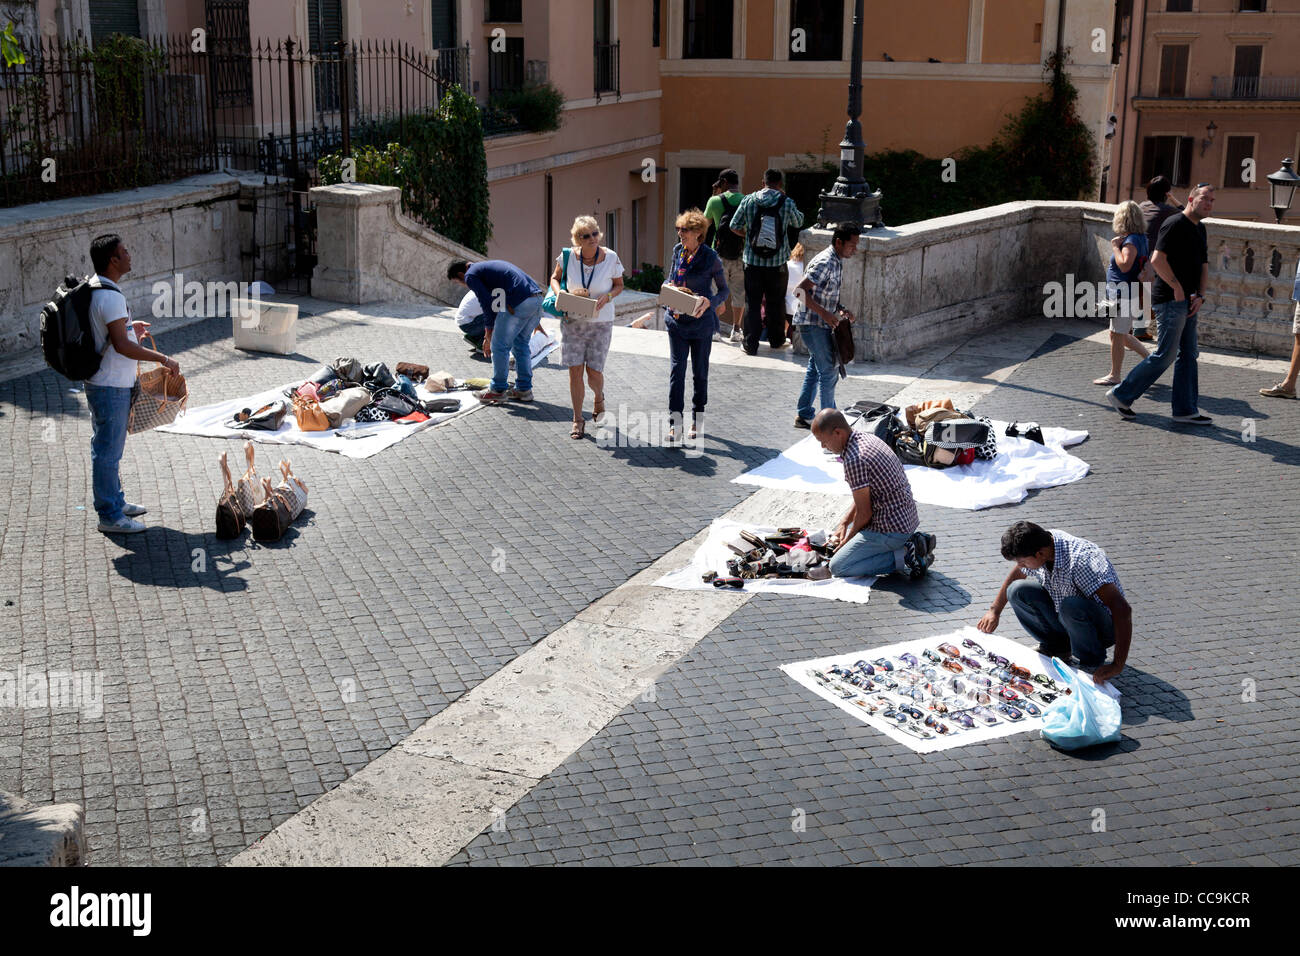 itinerant street sellers selling fake designer goods laid out on sheets on the streets of Rome Stock Photo